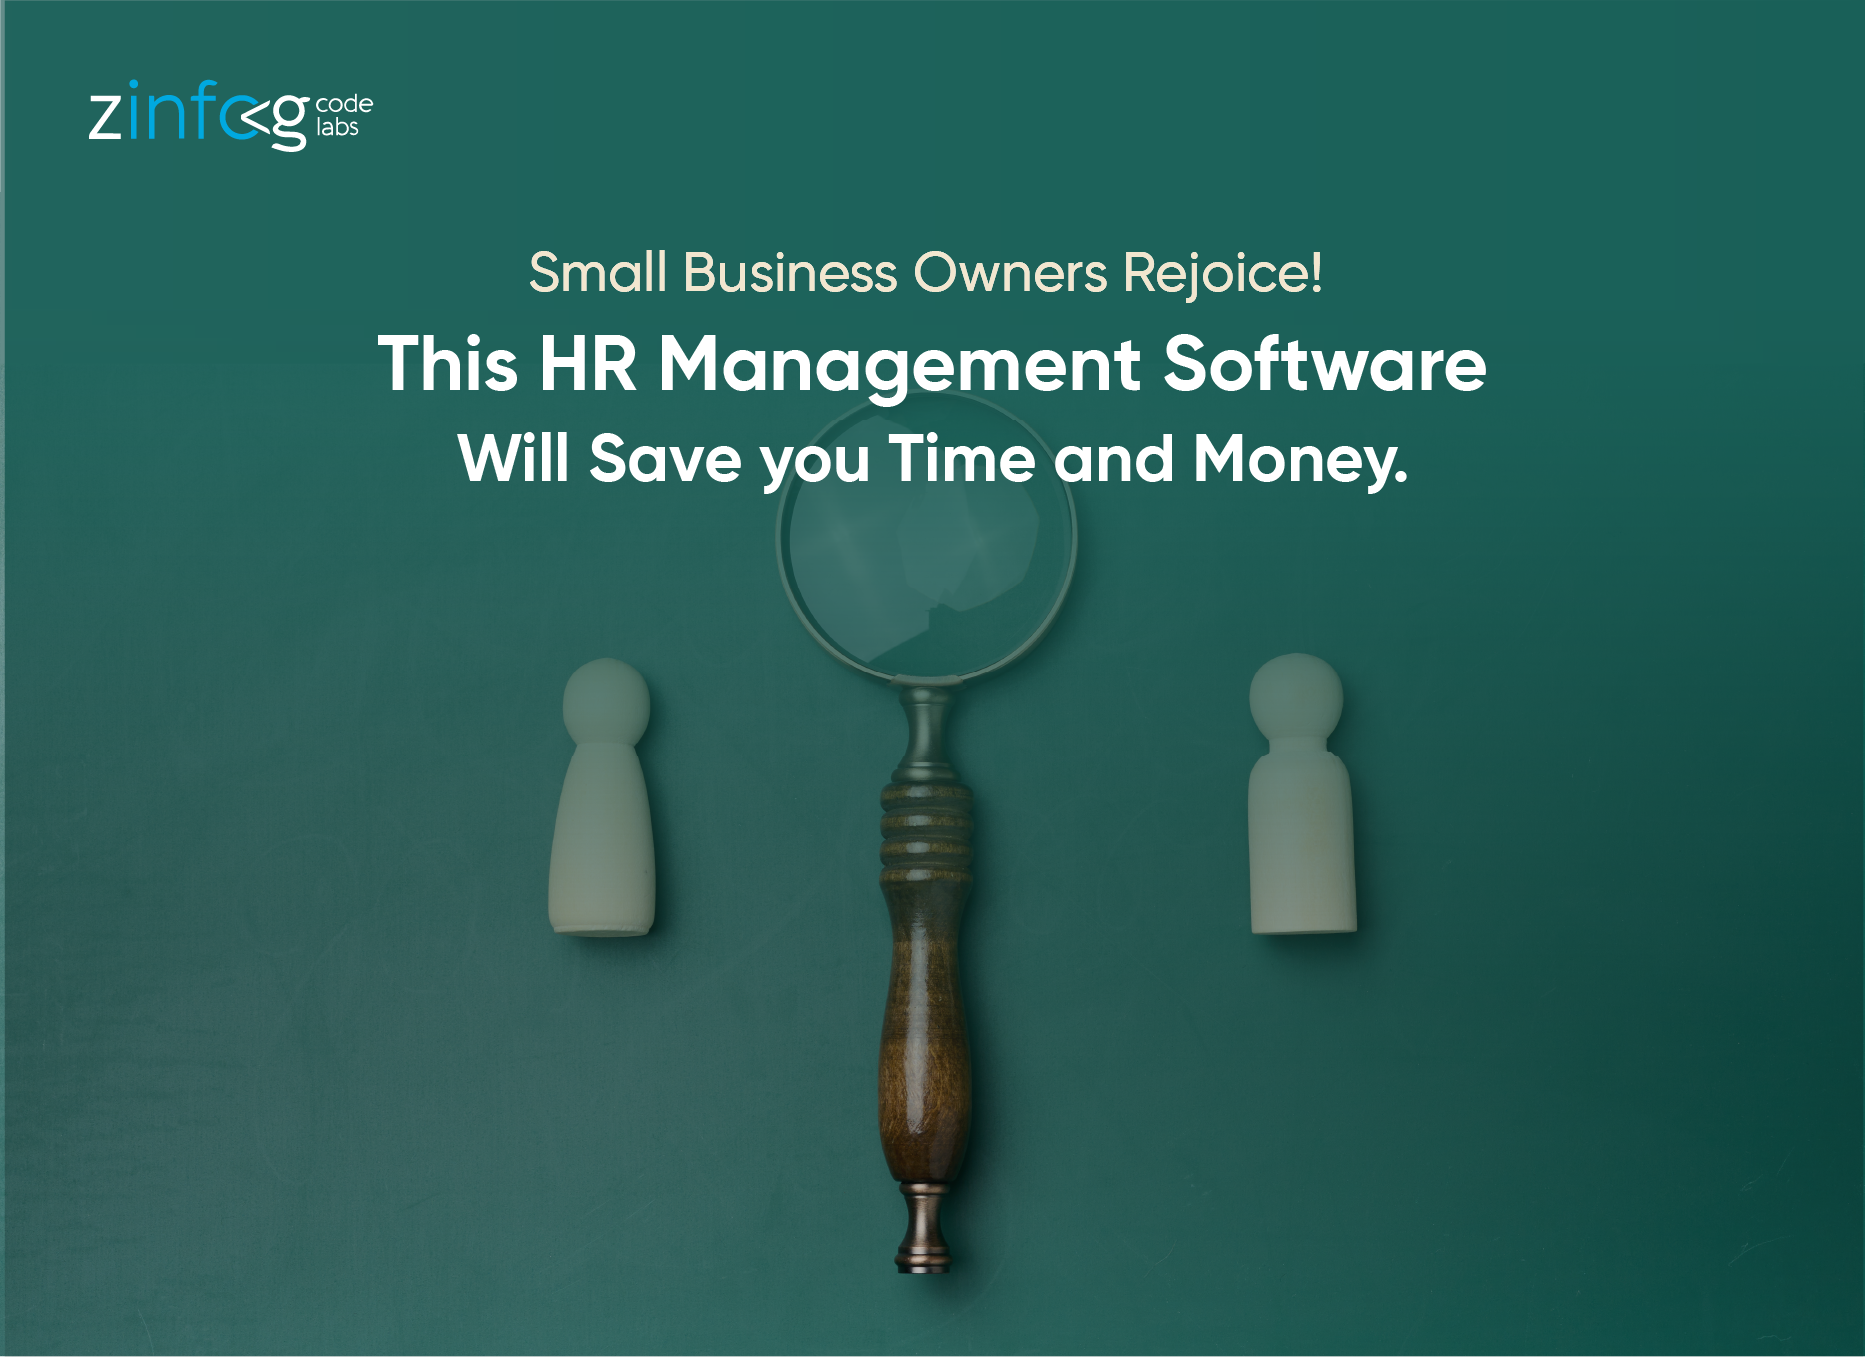 small-business-owners-rejoice-this-hr-management-software-will-save-you-time-and-money.html